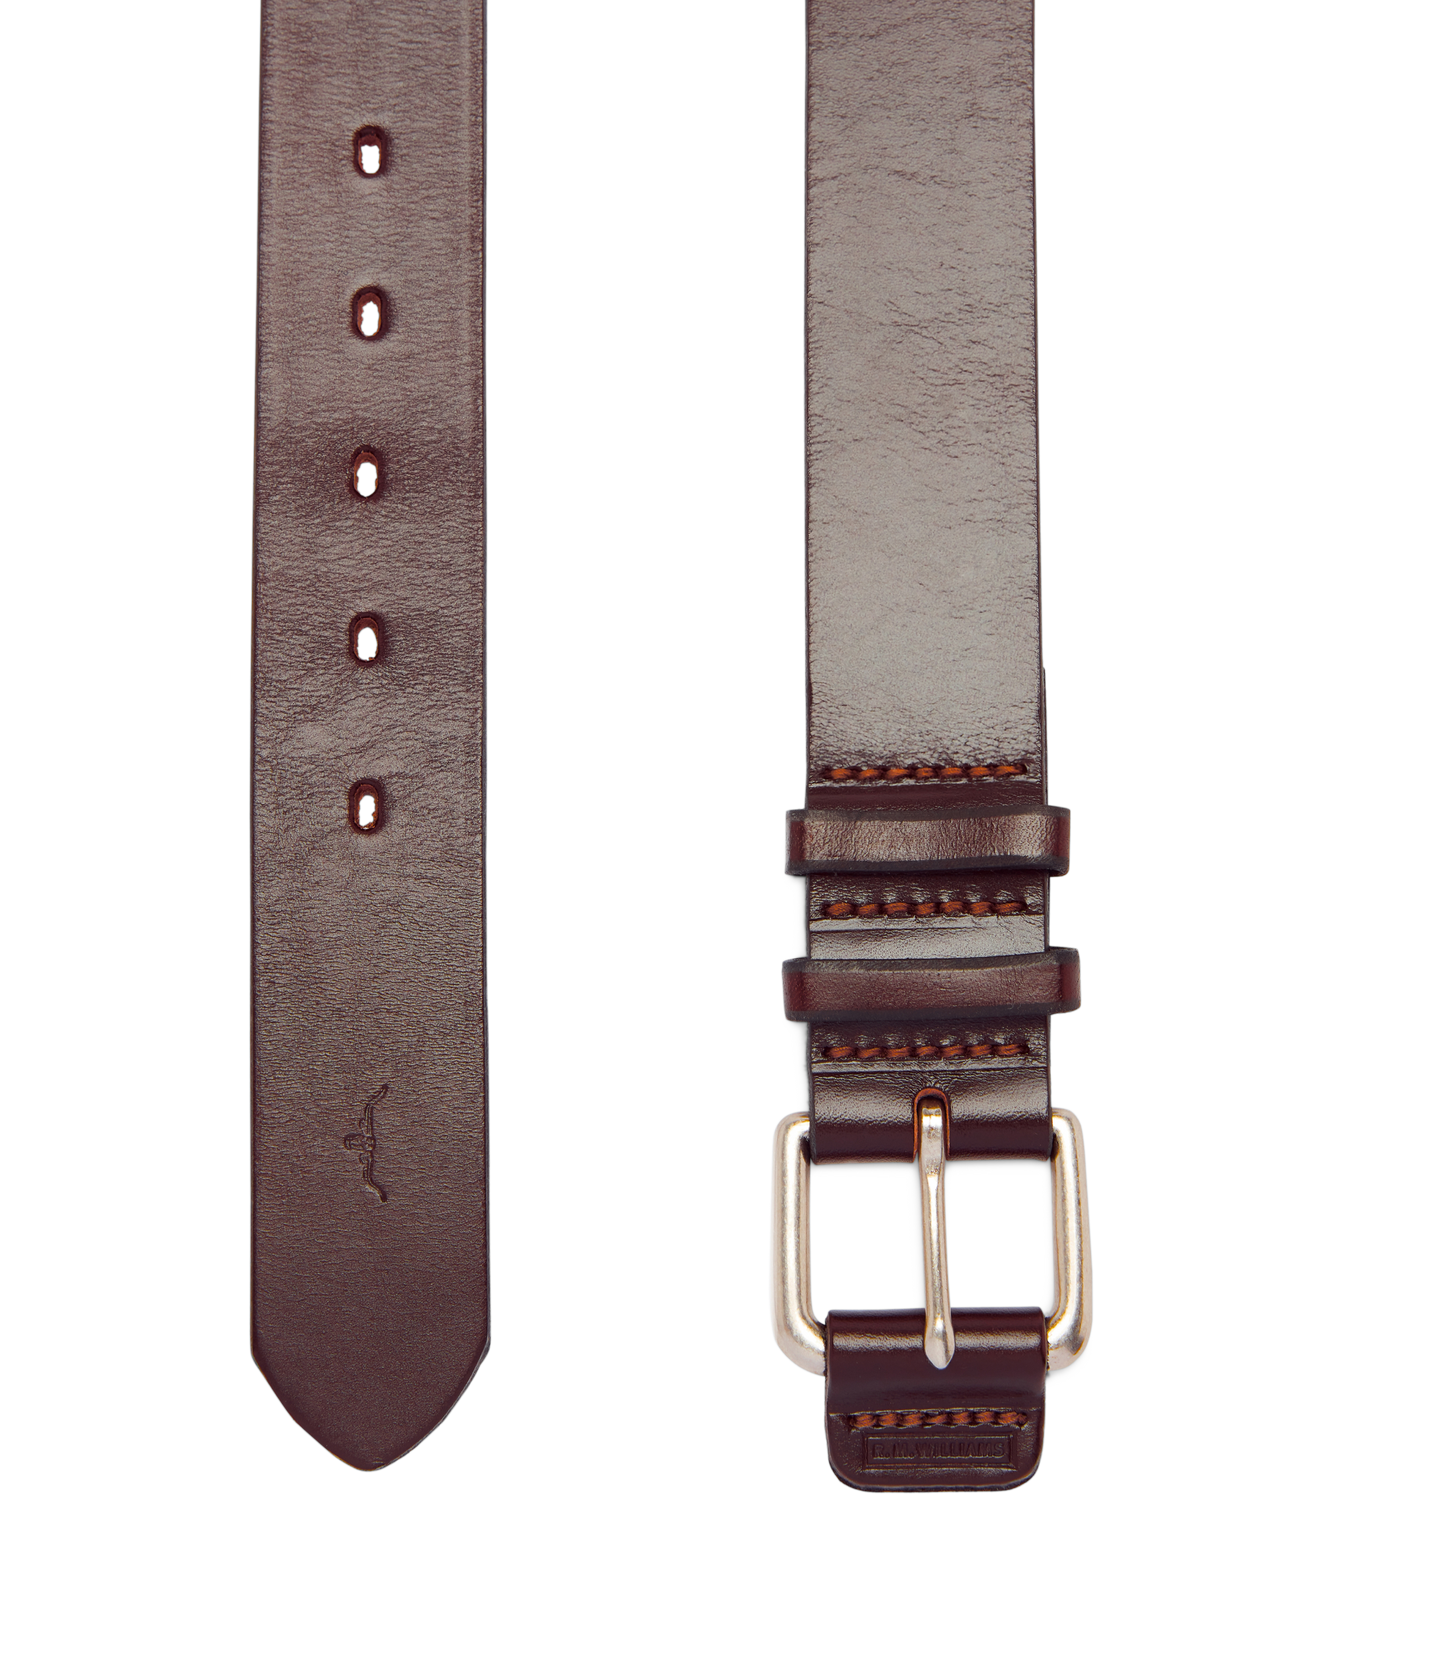 1 1/2 COVERED BUCKLE BELT